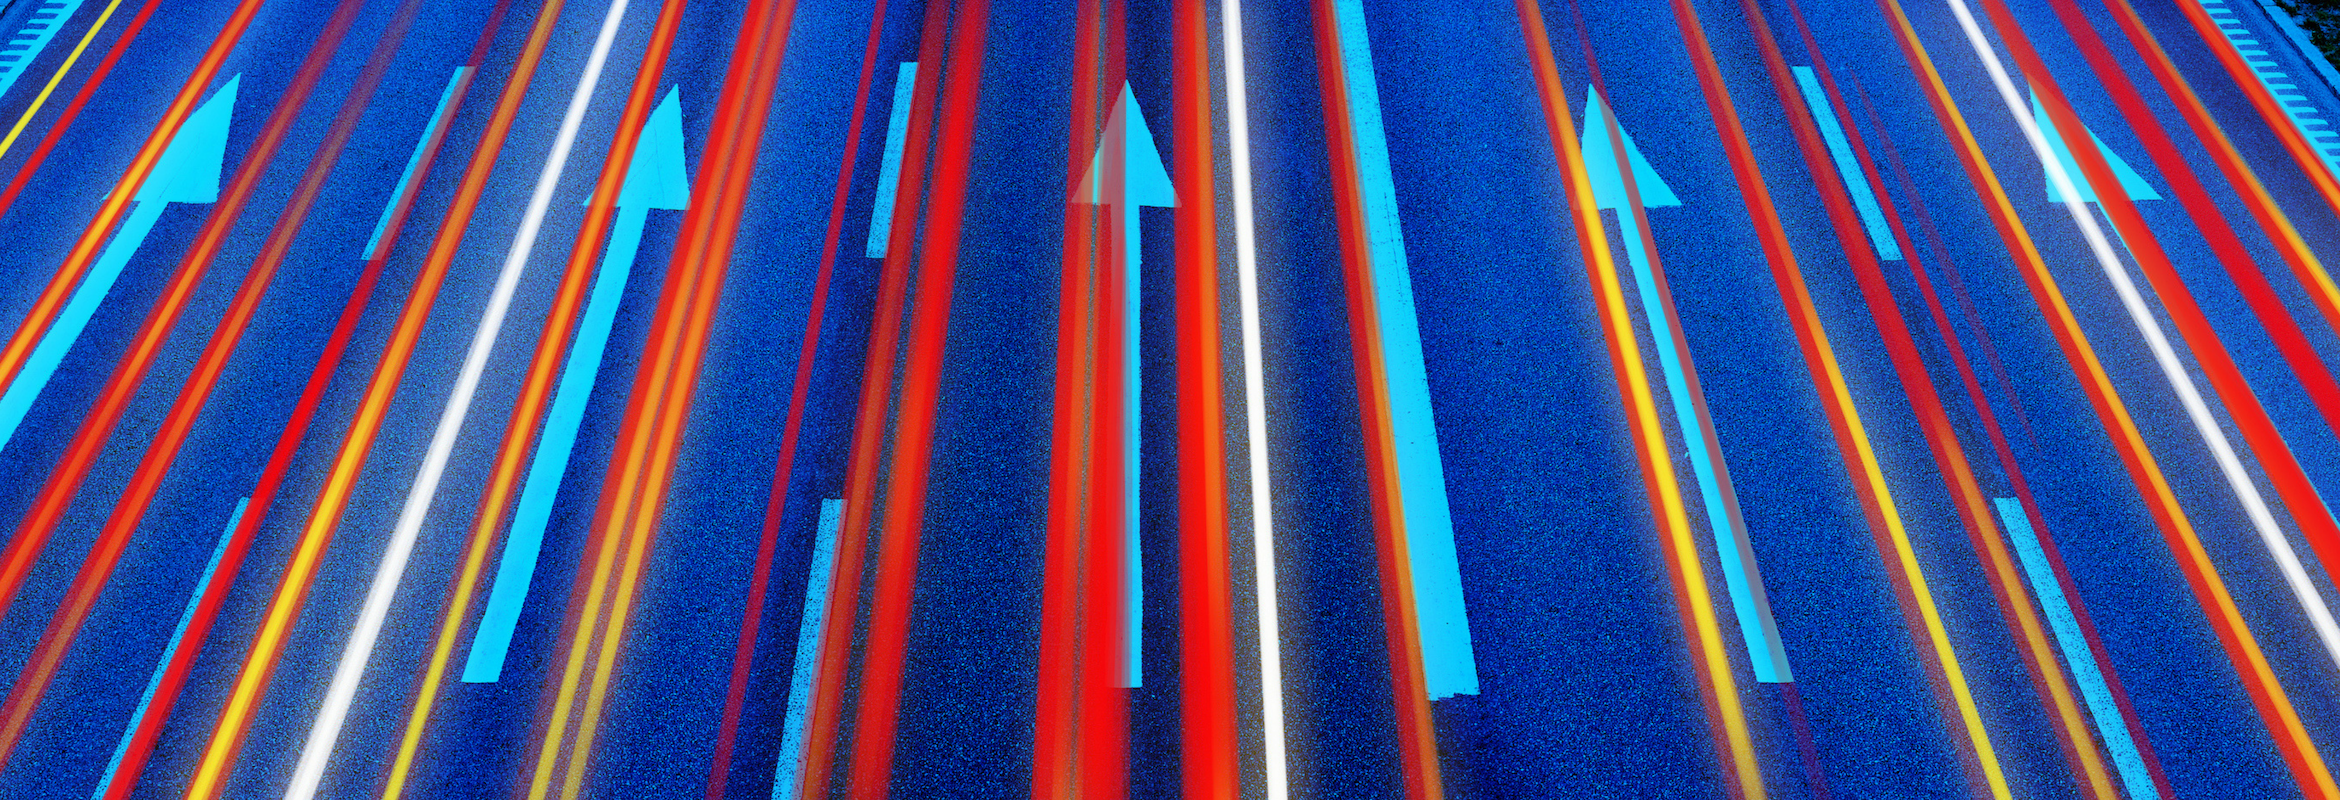 Colorful arrows on a blue background.